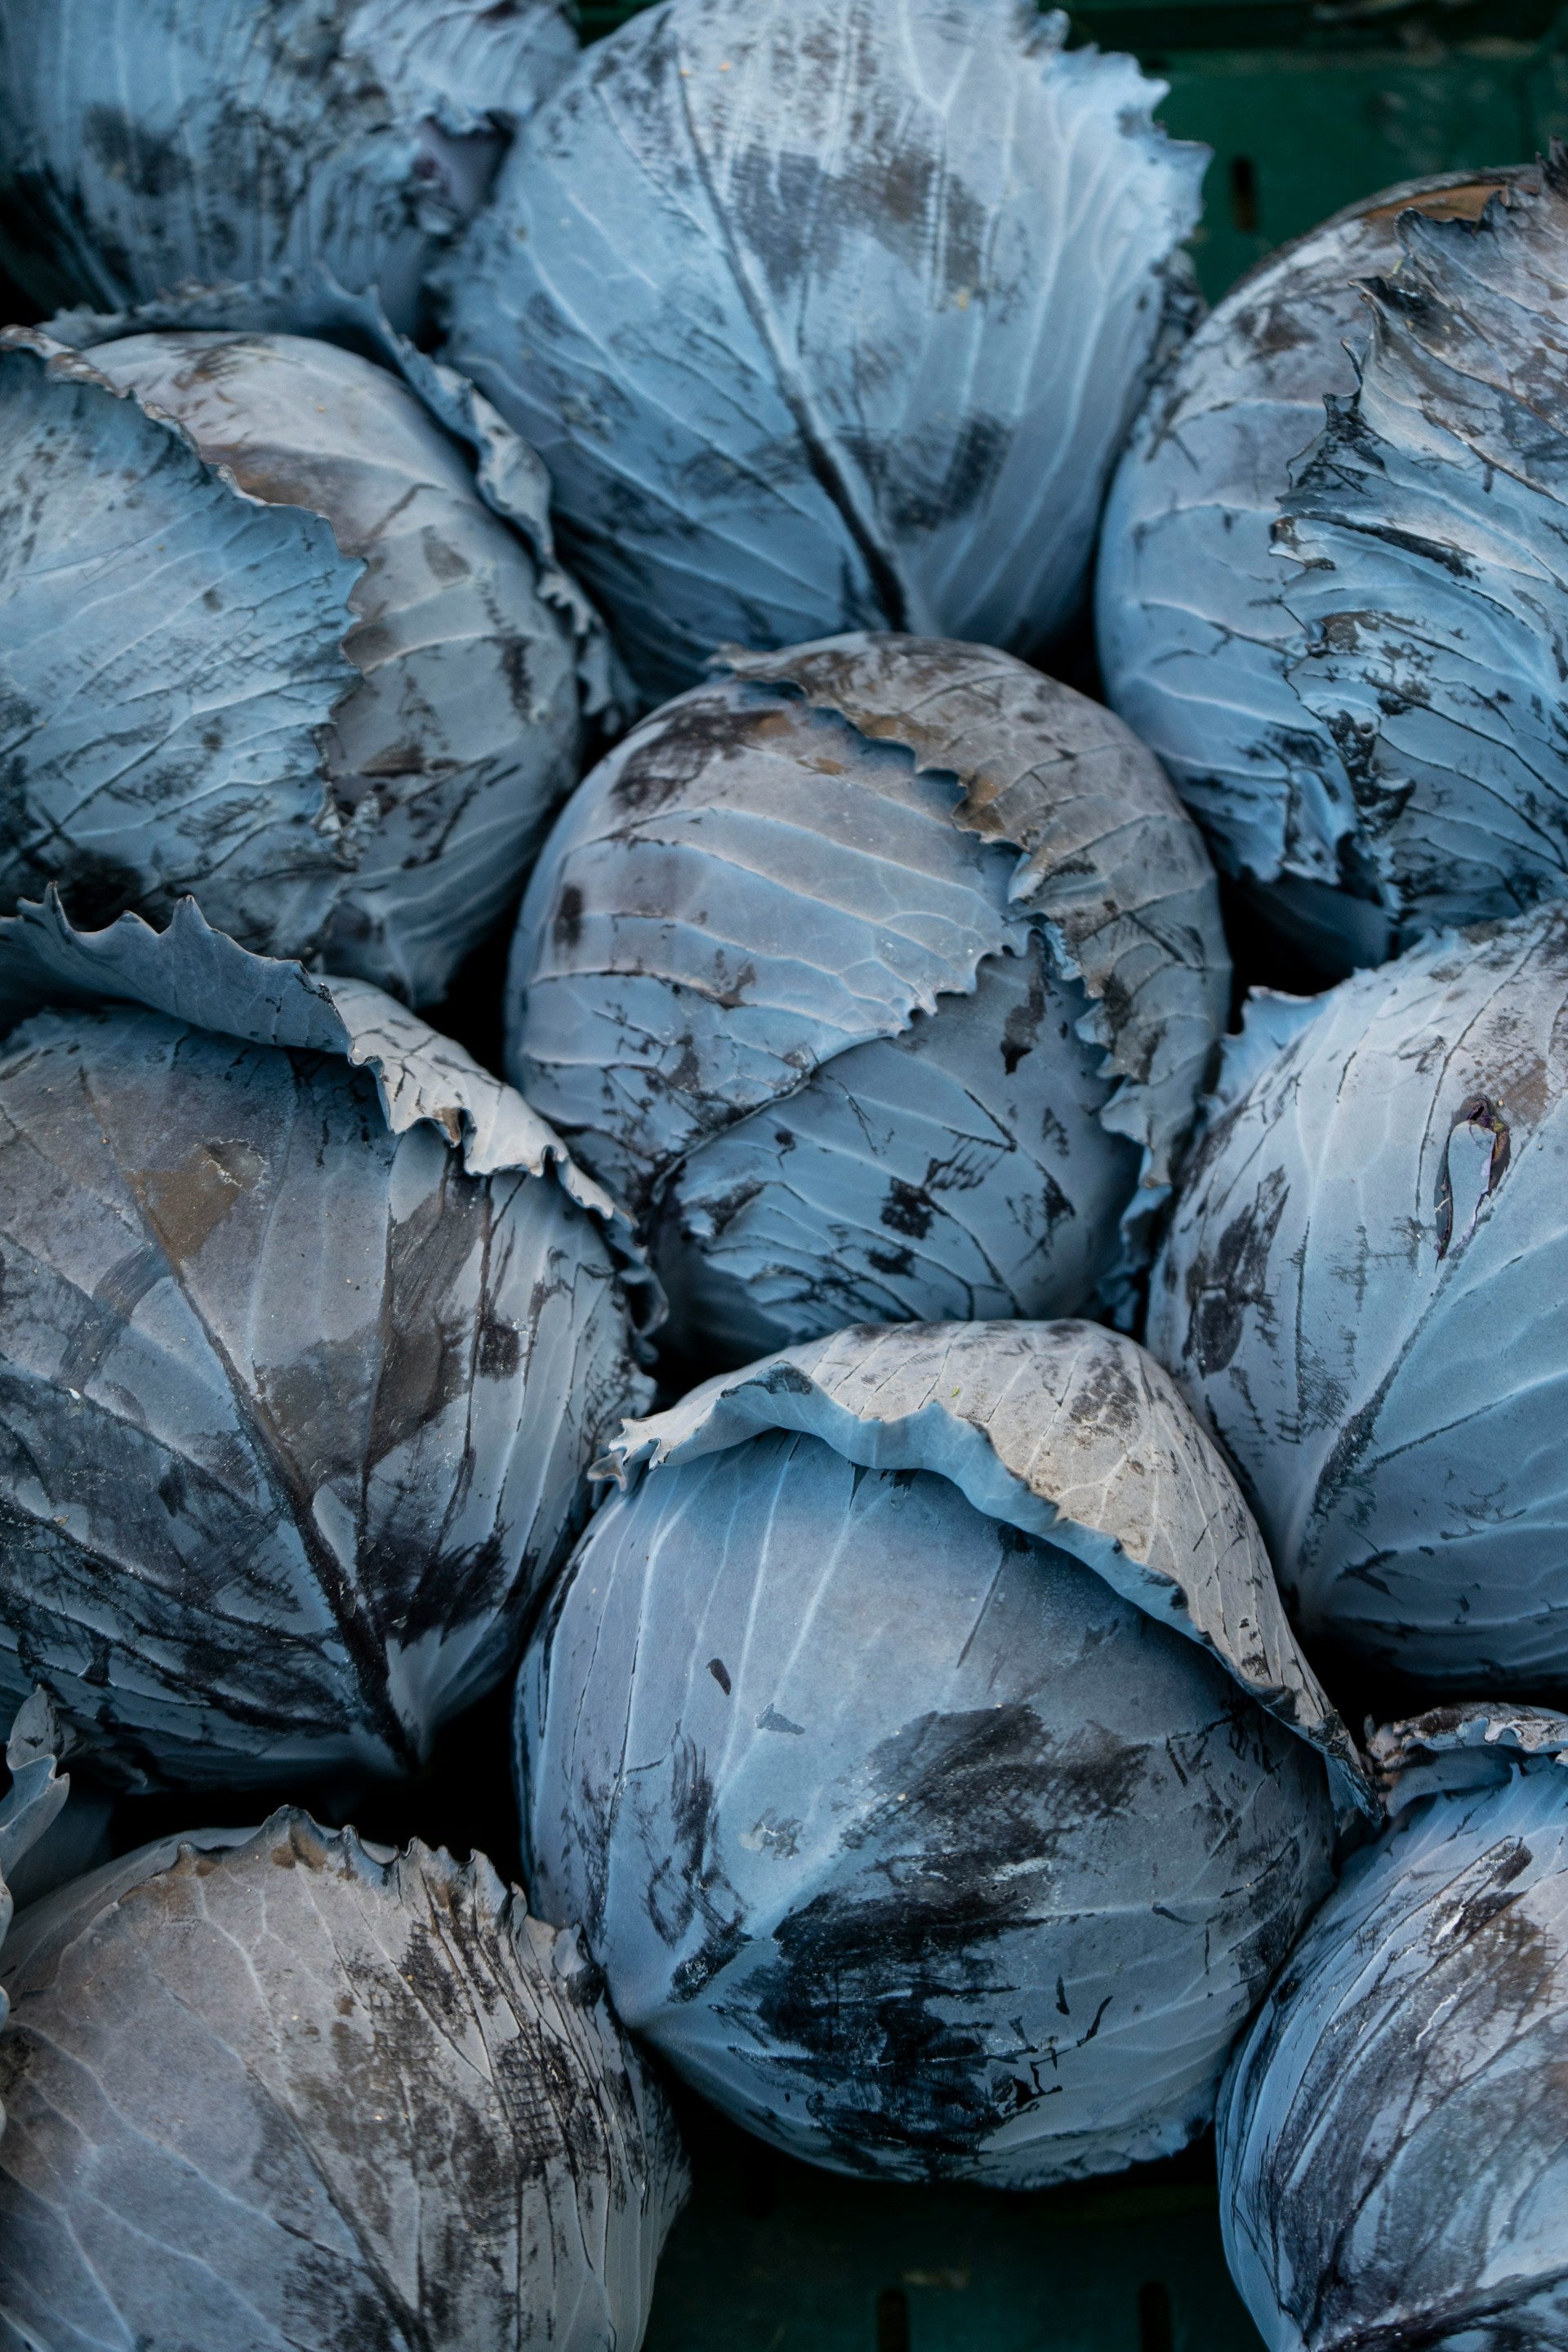 On display are several heads of cabbage, of the variety Red Acre, recently harvested, and laying on a flat surface, tightly grouped together. The colors are grayish blue. The lighting appears to be early morning. 